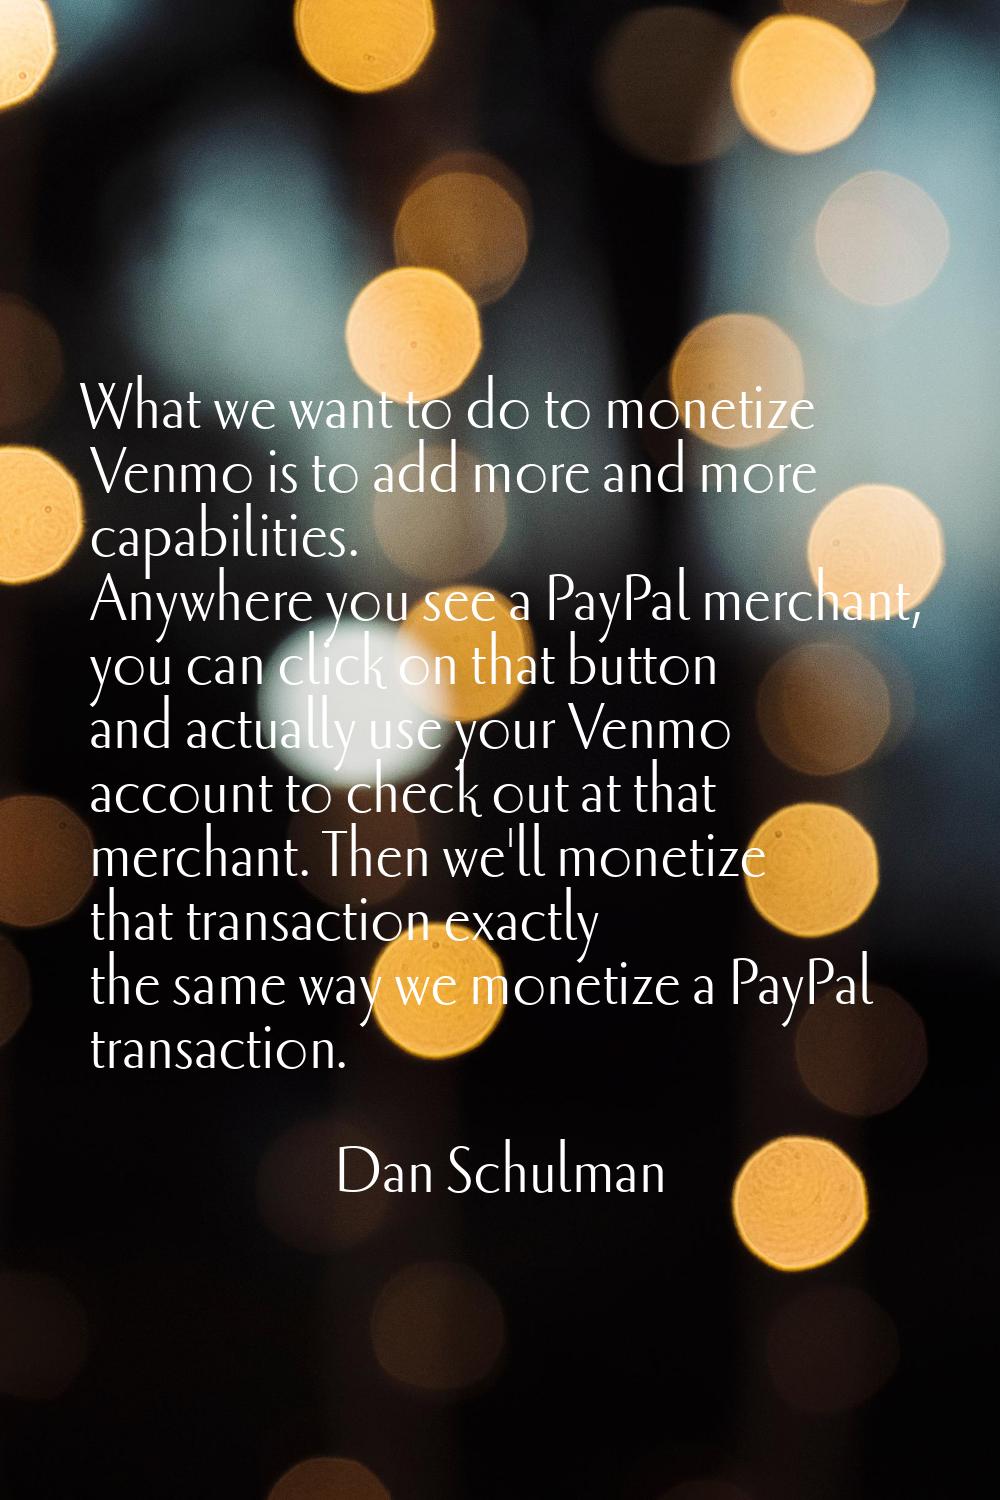 What we want to do to monetize Venmo is to add more and more capabilities. Anywhere you see a PayPa